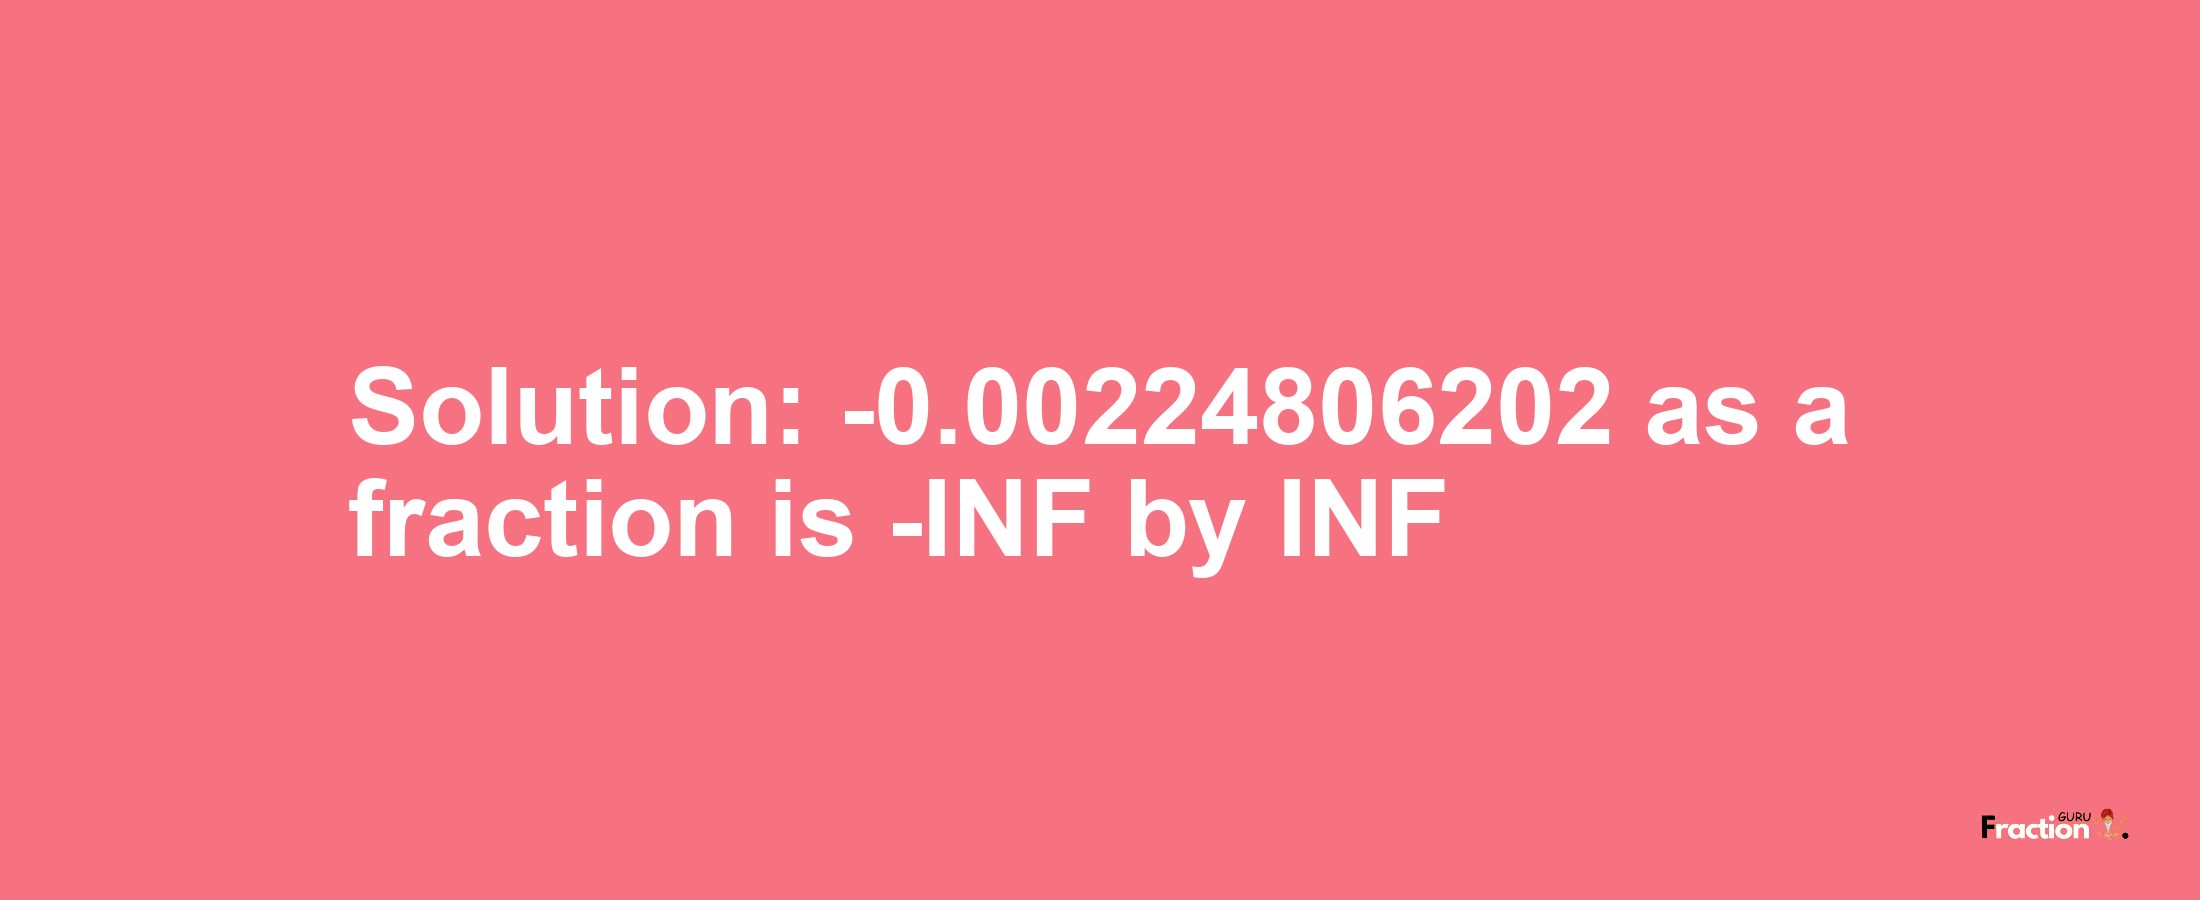 Solution:-0.00224806202 as a fraction is -INF/INF